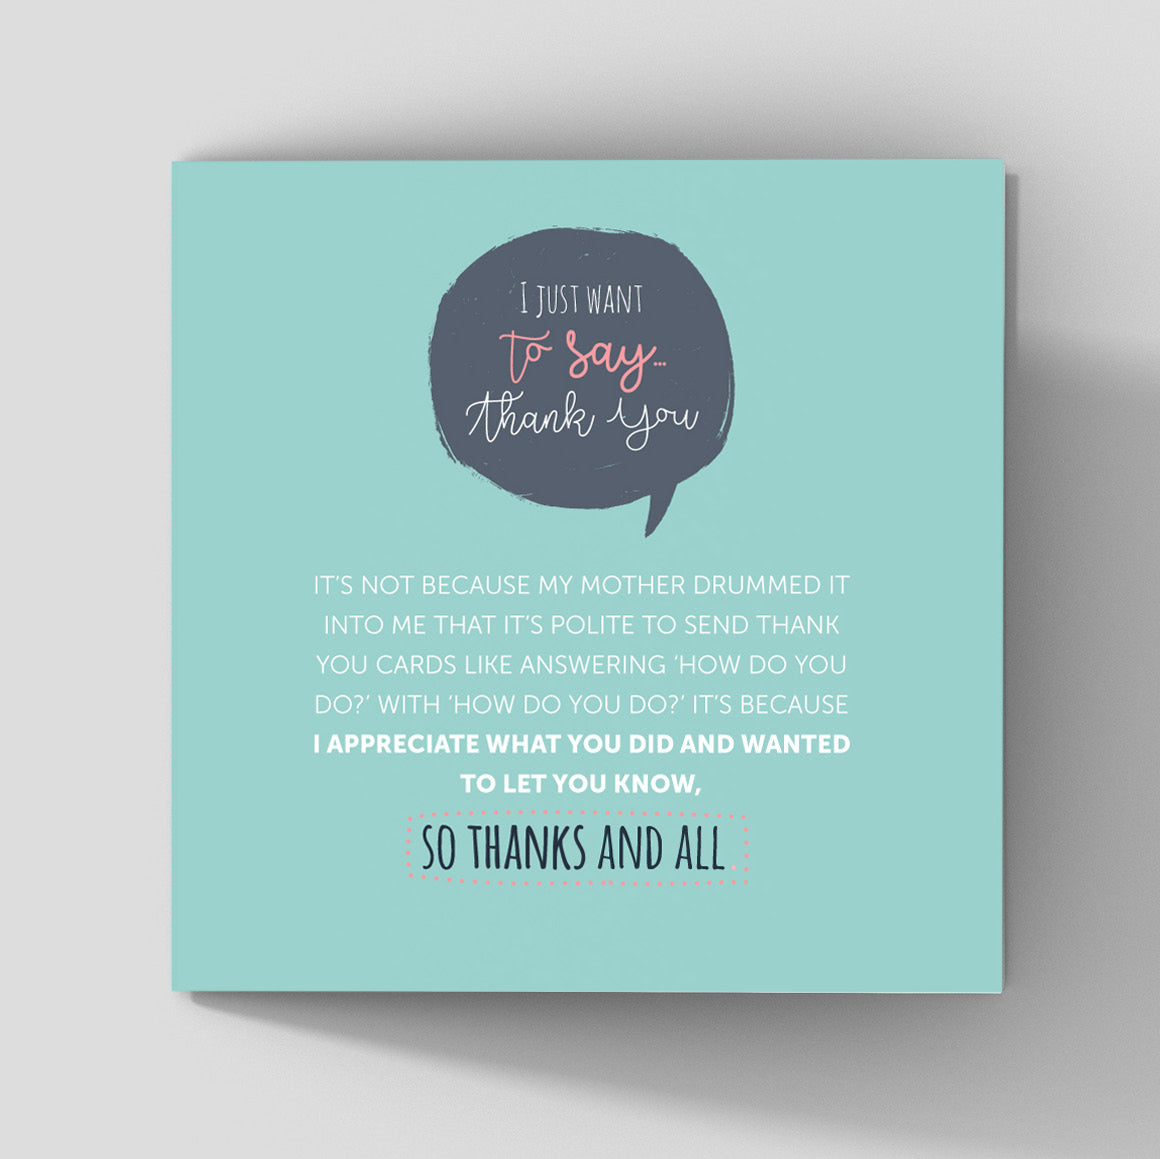 quirky thank you card mint background about showing appreciation